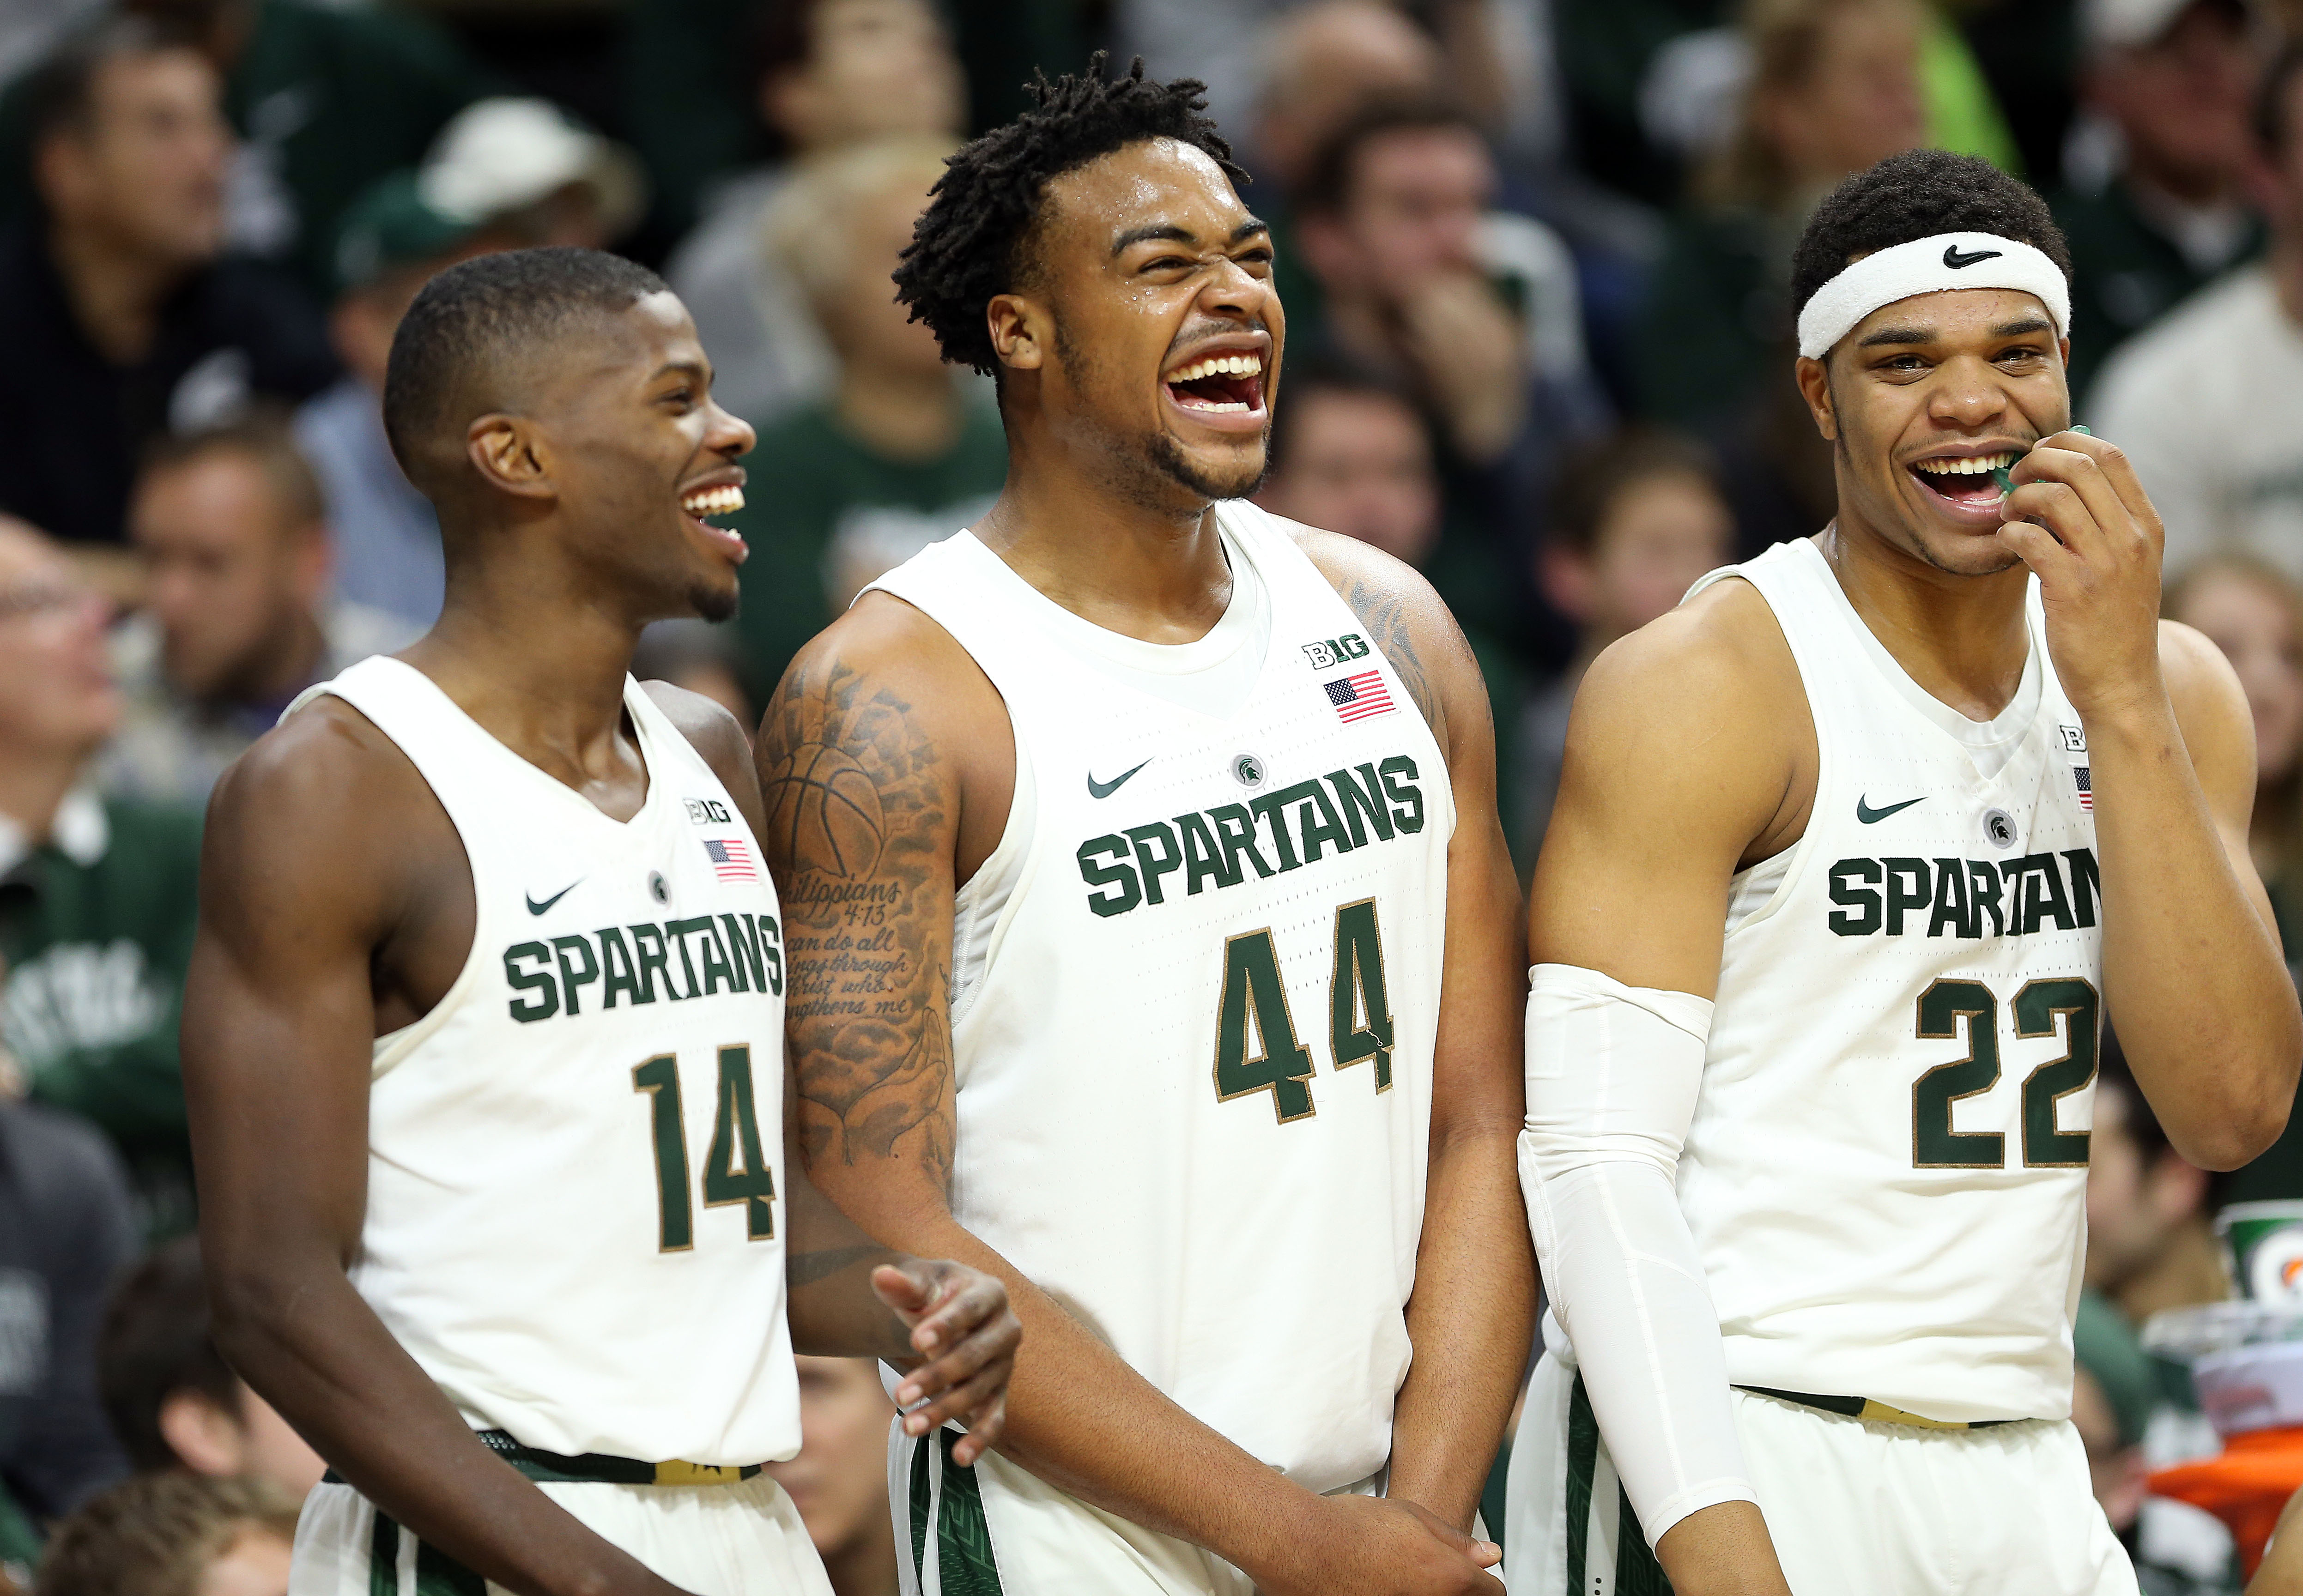 Michigan State rolls out new uniform for basketball season